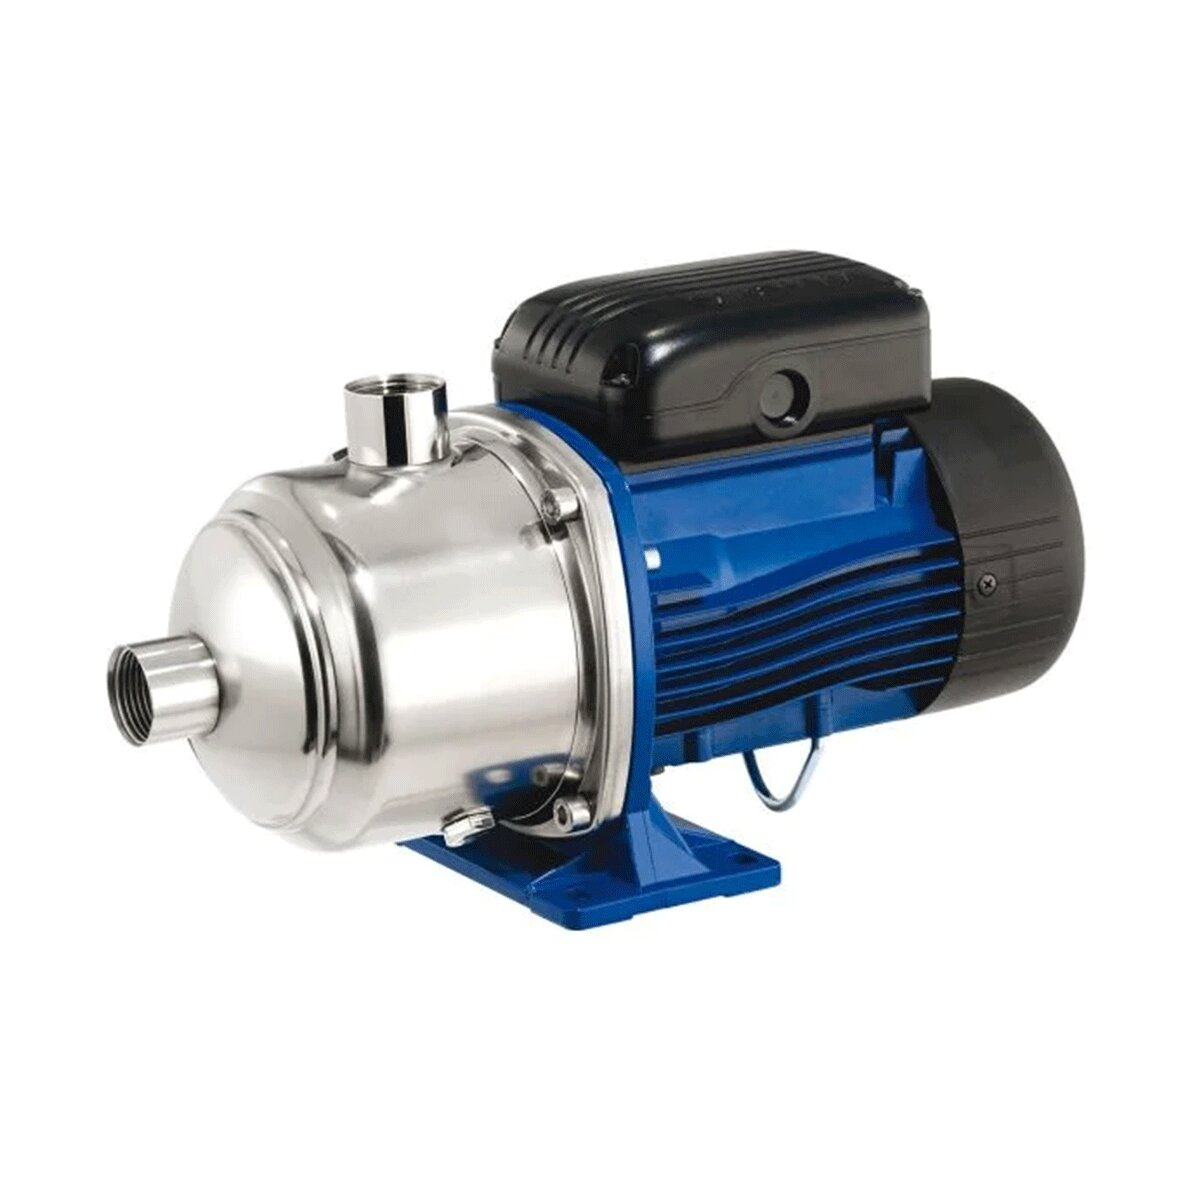 Lowara 3HM05 series multistage centrifugal surface pump IE2